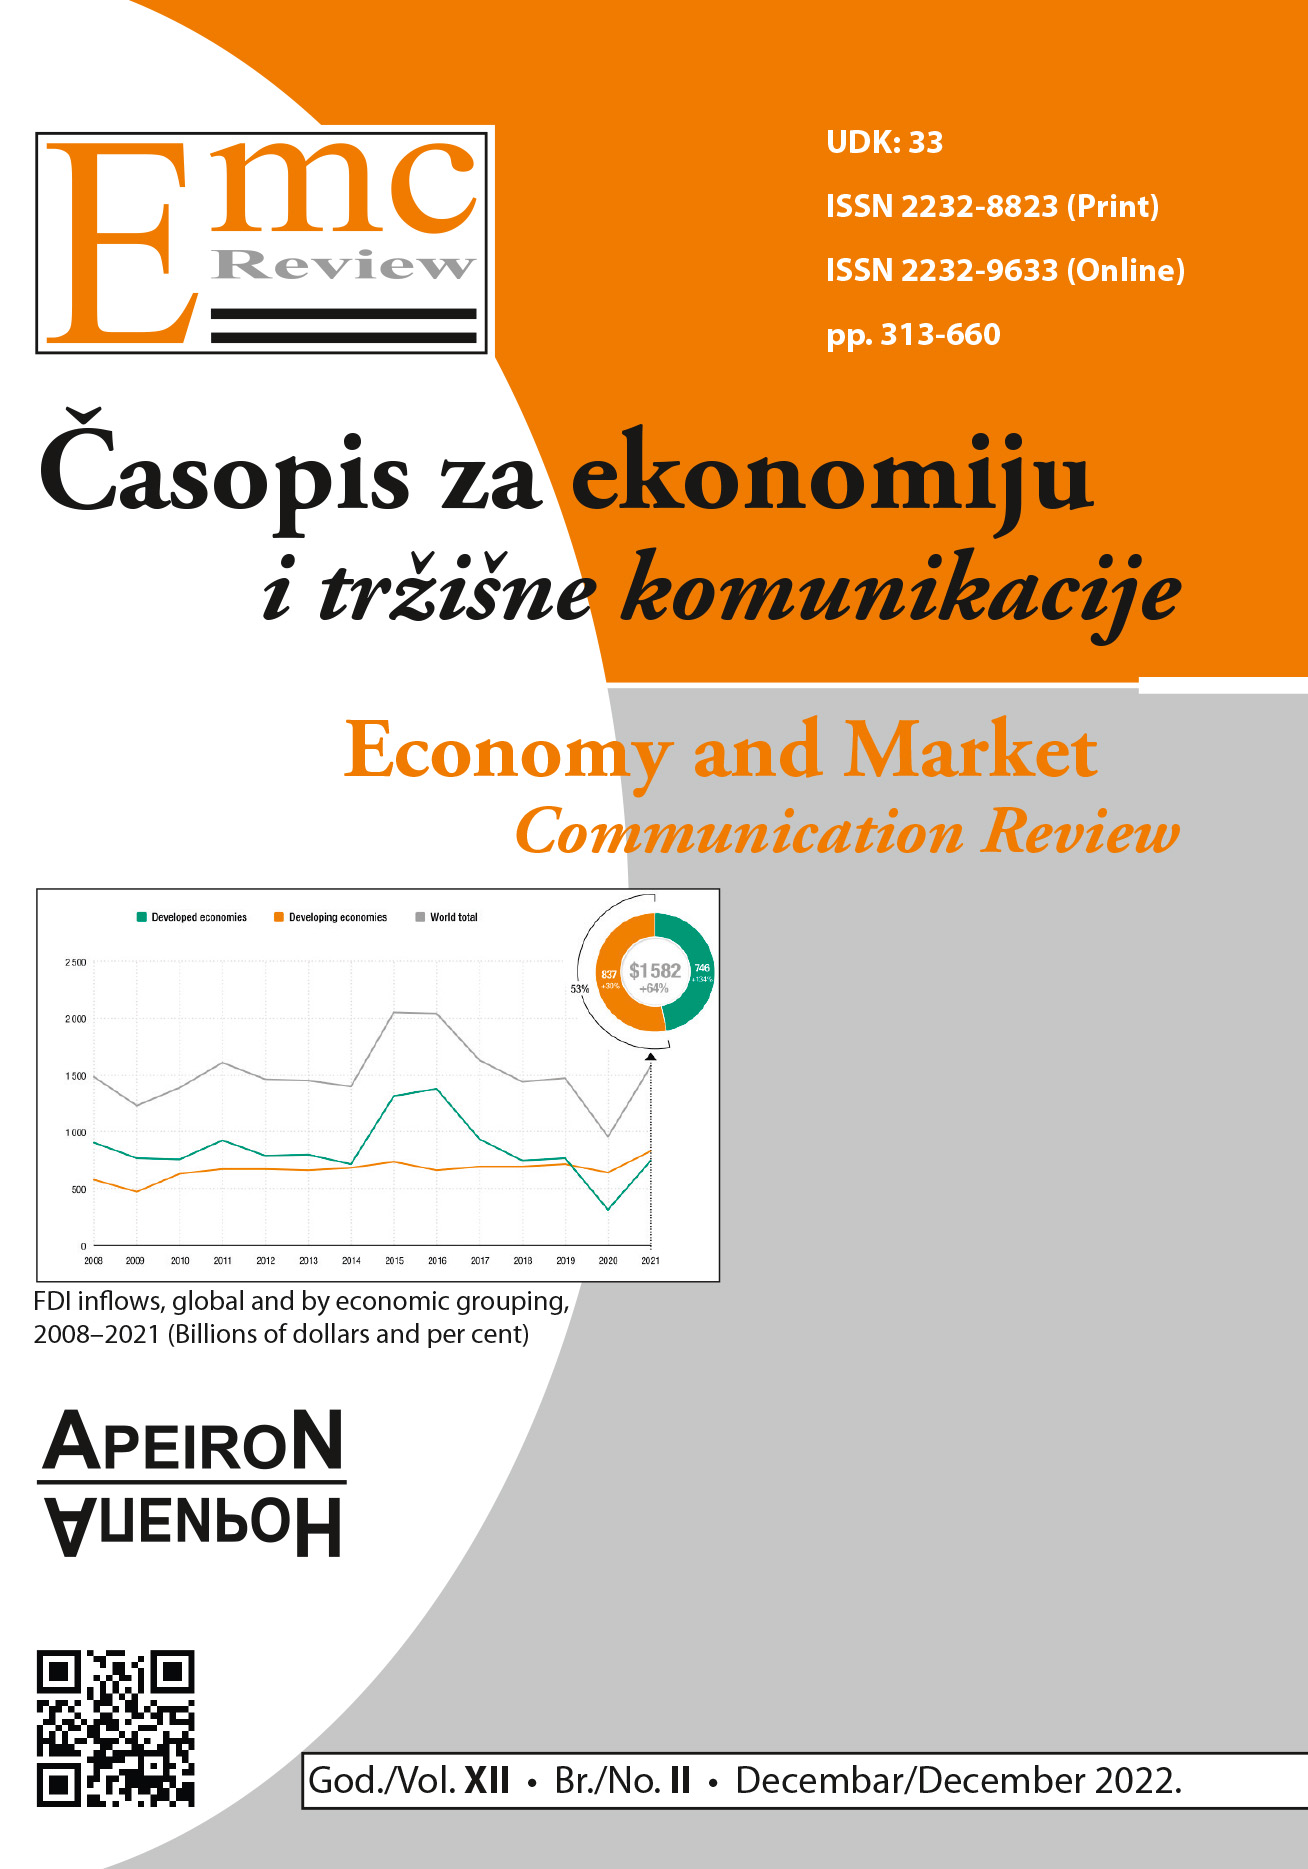 					View Vol. 24 No. 2 (2022): EMC Review - ECONOMY AND MARKET COMMUNICATION REVIEW
				